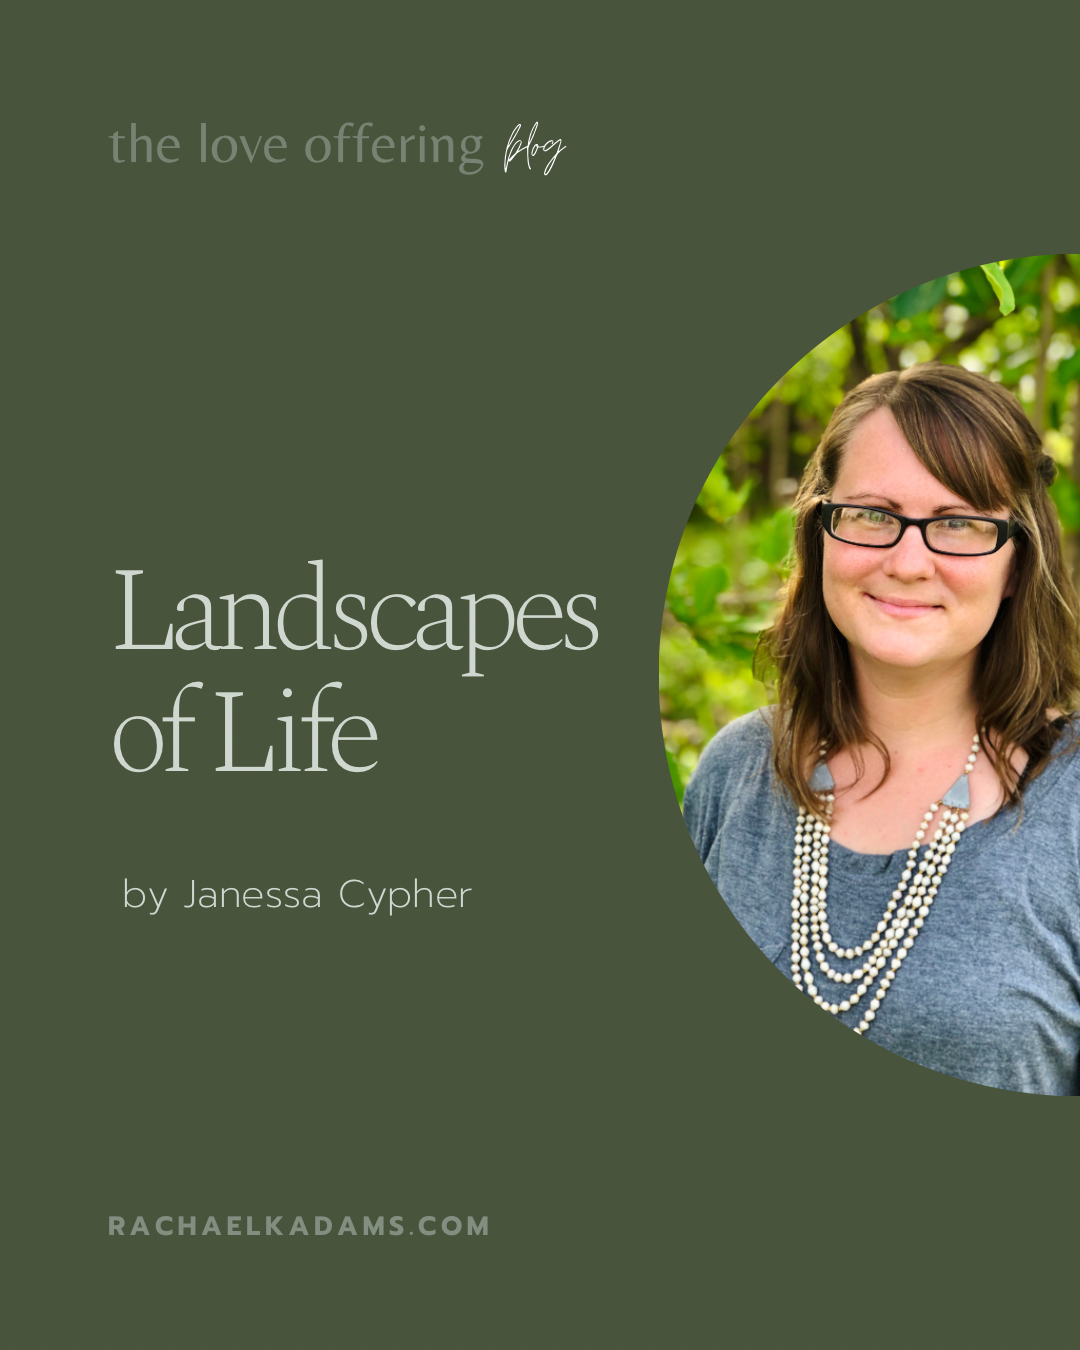 Landscapes of Life by Janessa Cypher